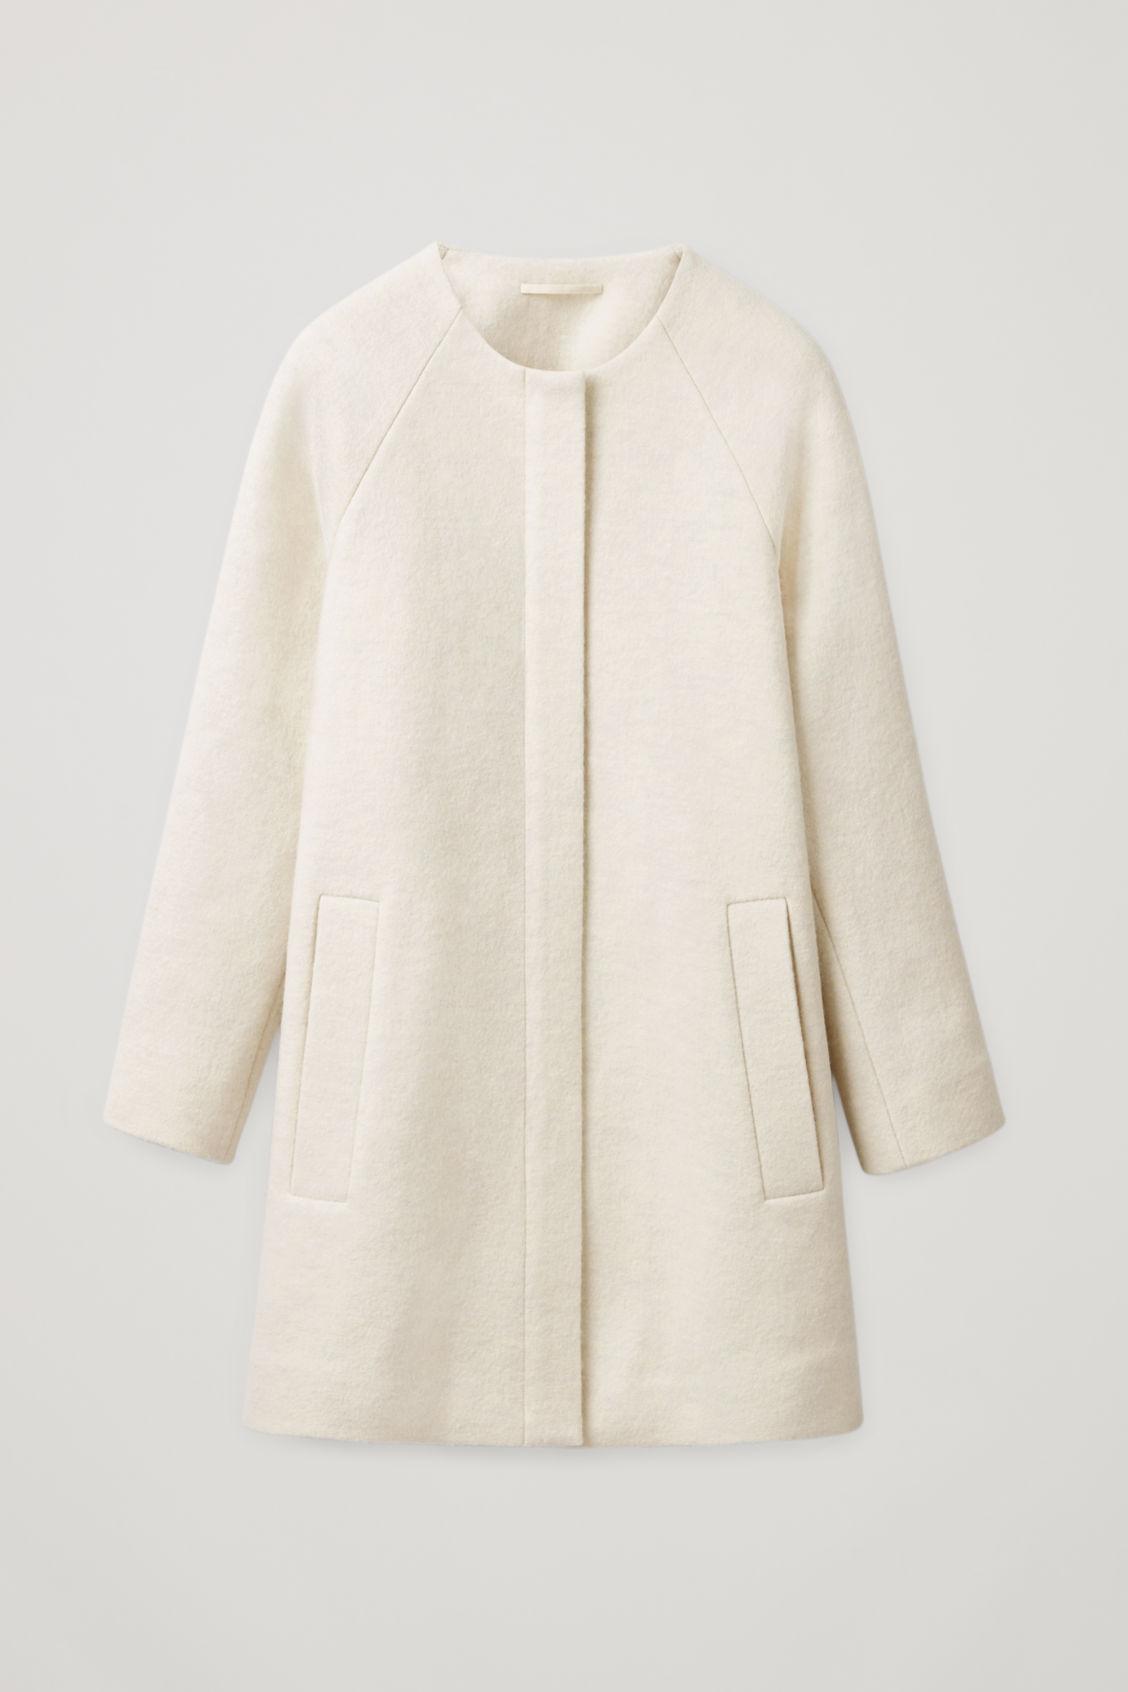 COS Collarless A-line Wool Coat in White | Lyst